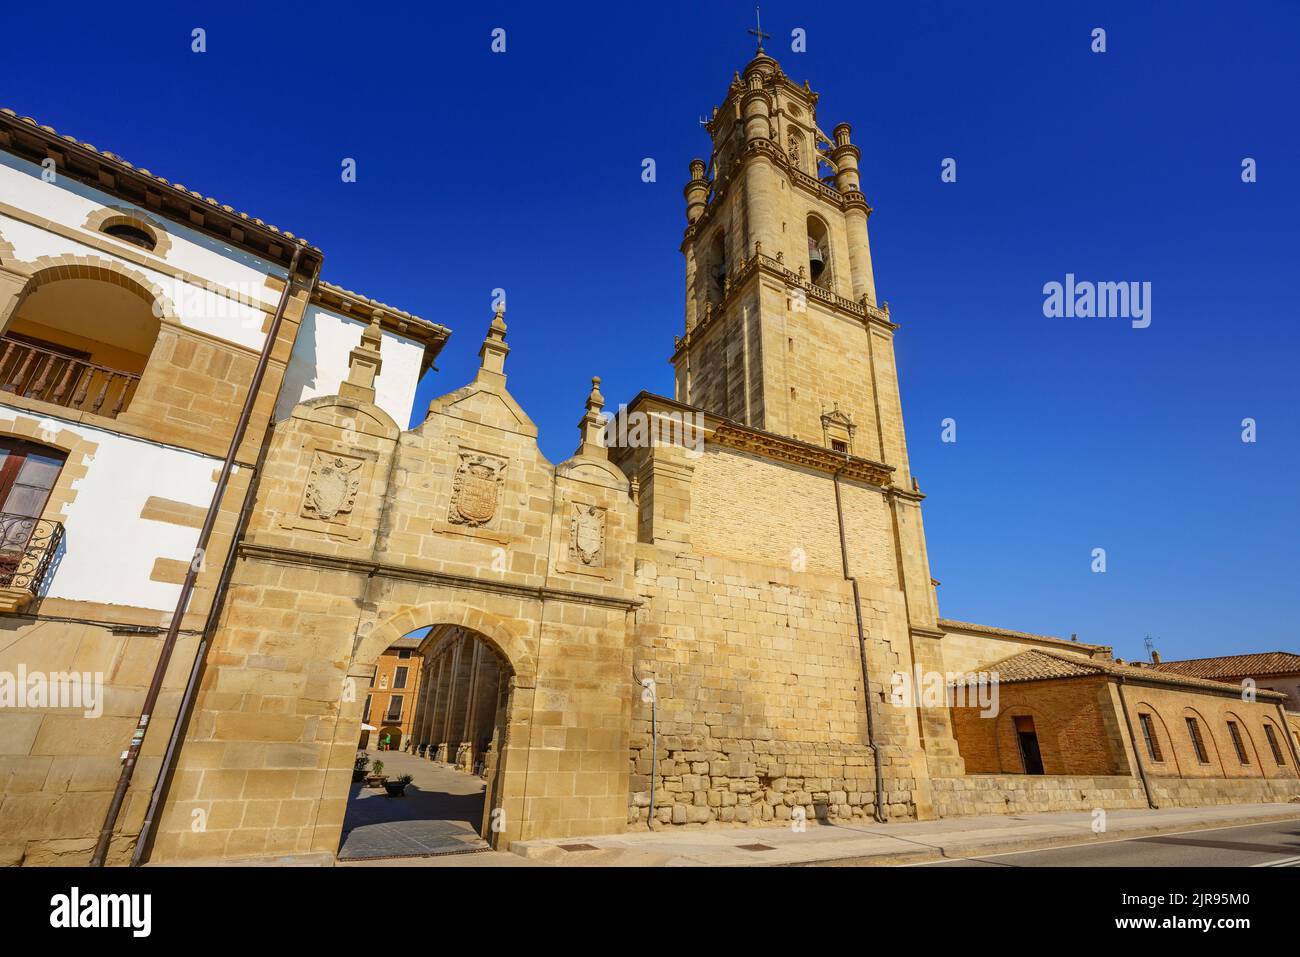 View of the gate and the church of Los Arcos, Navarre, Spain Stock Photo